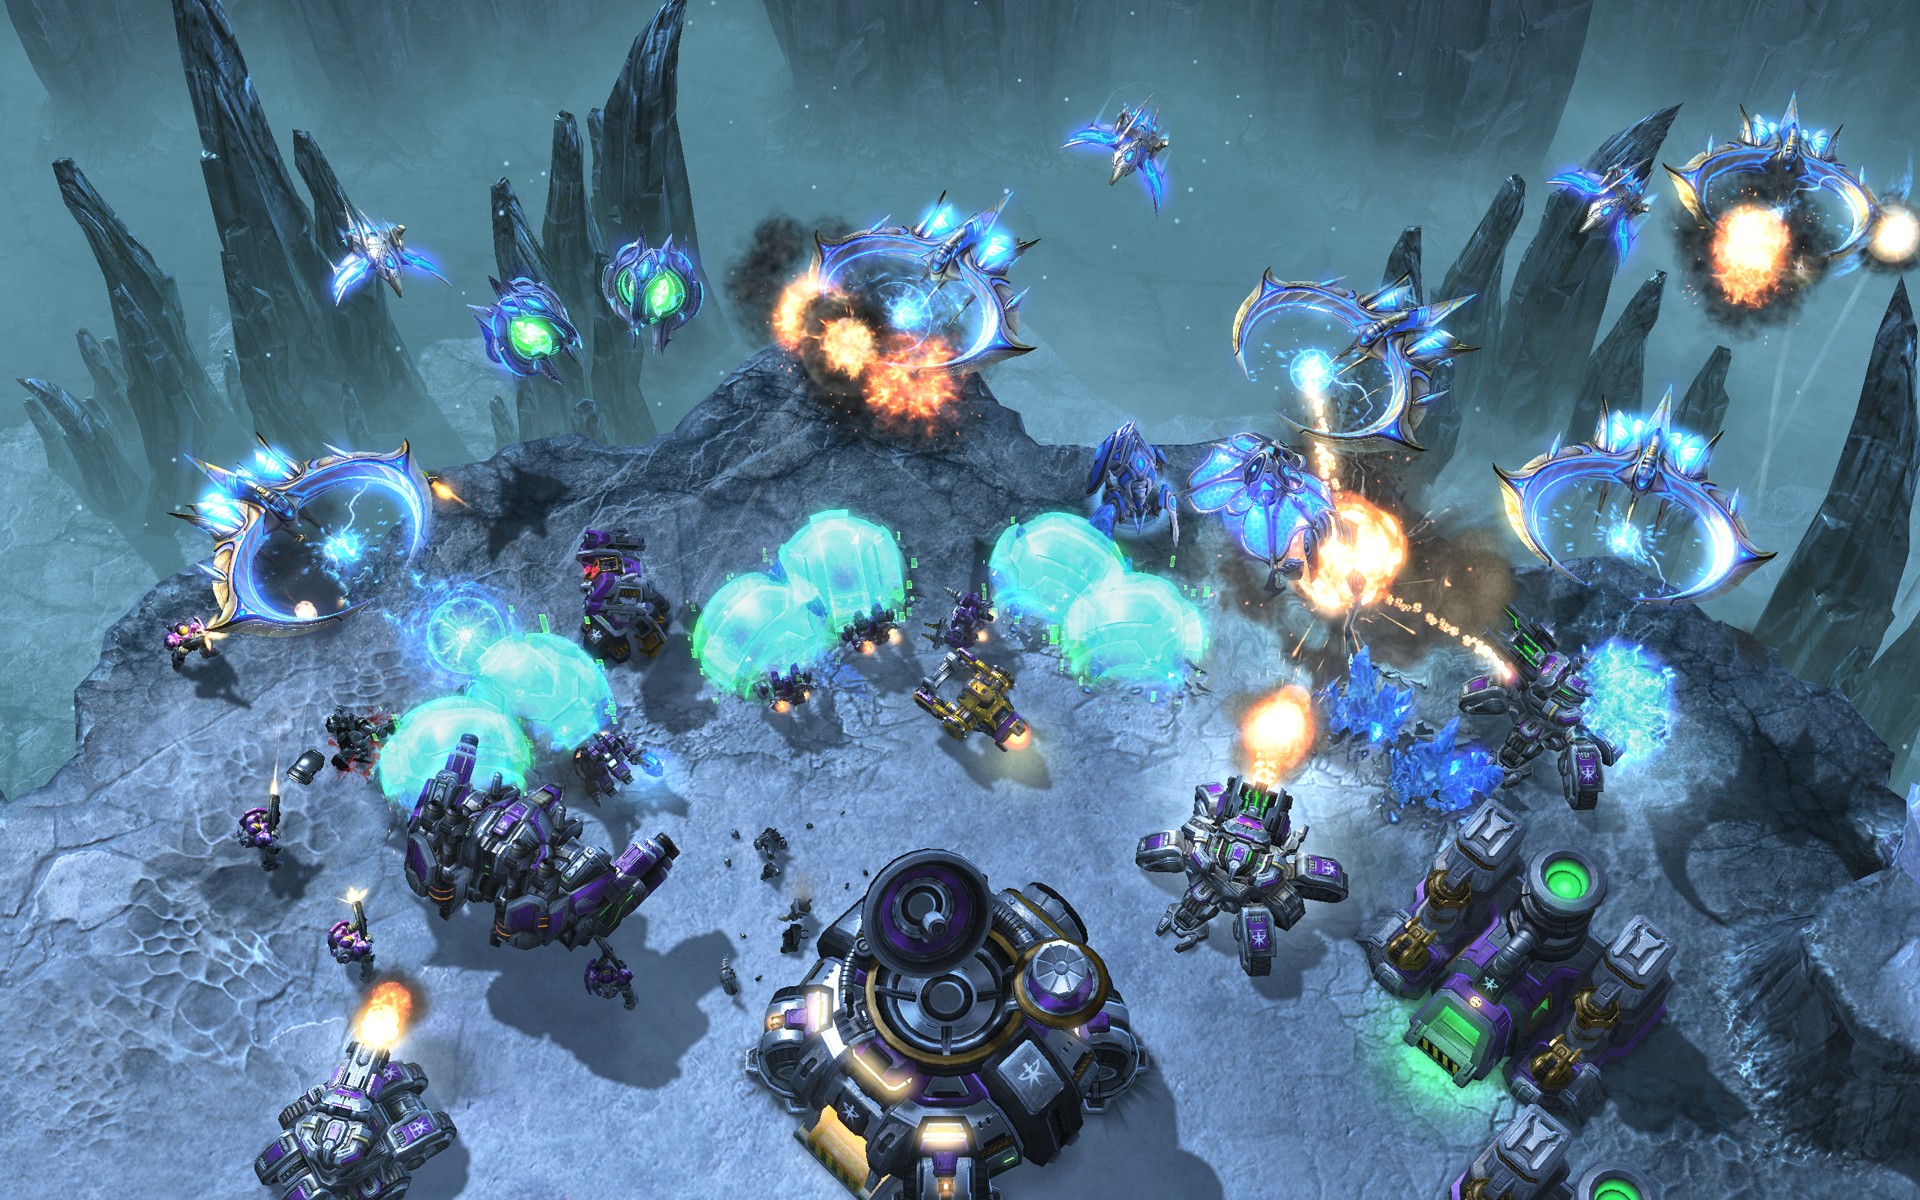 Some professional Starcraft II players were found cheating and are banned until May